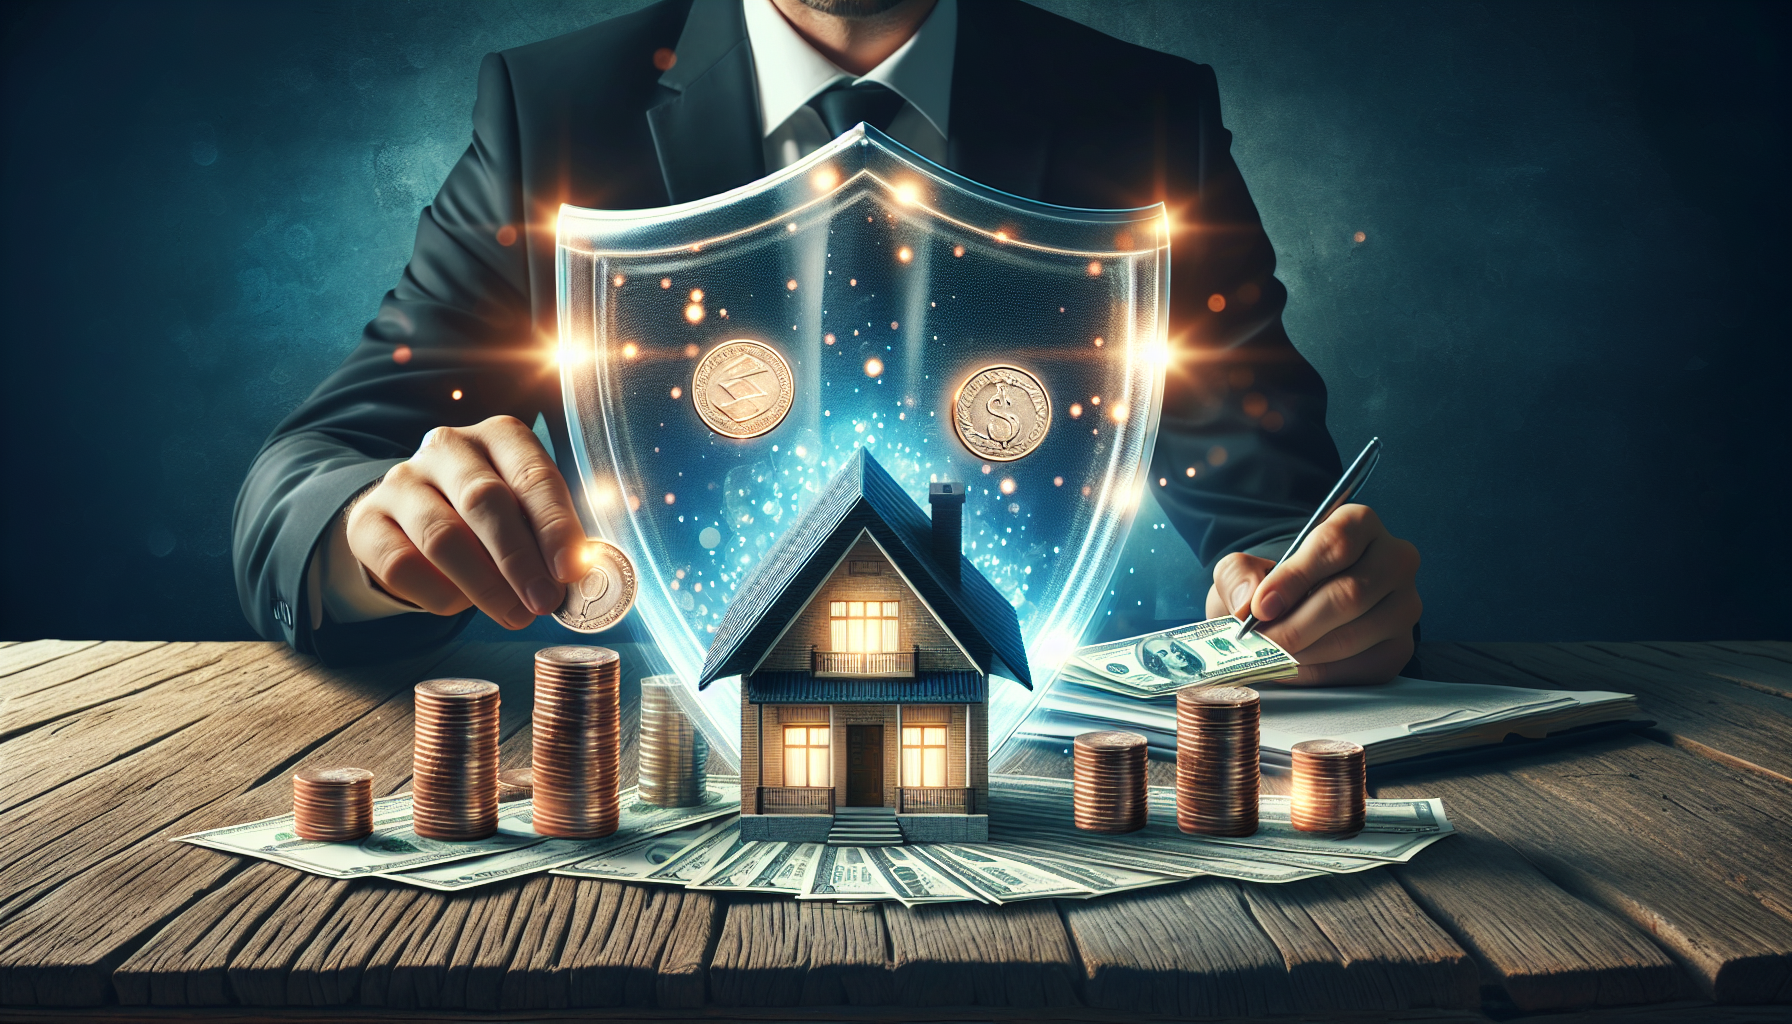 Illustration of a person managing finances and a house with a shield, representing proactive measures to prevent future foreclosures